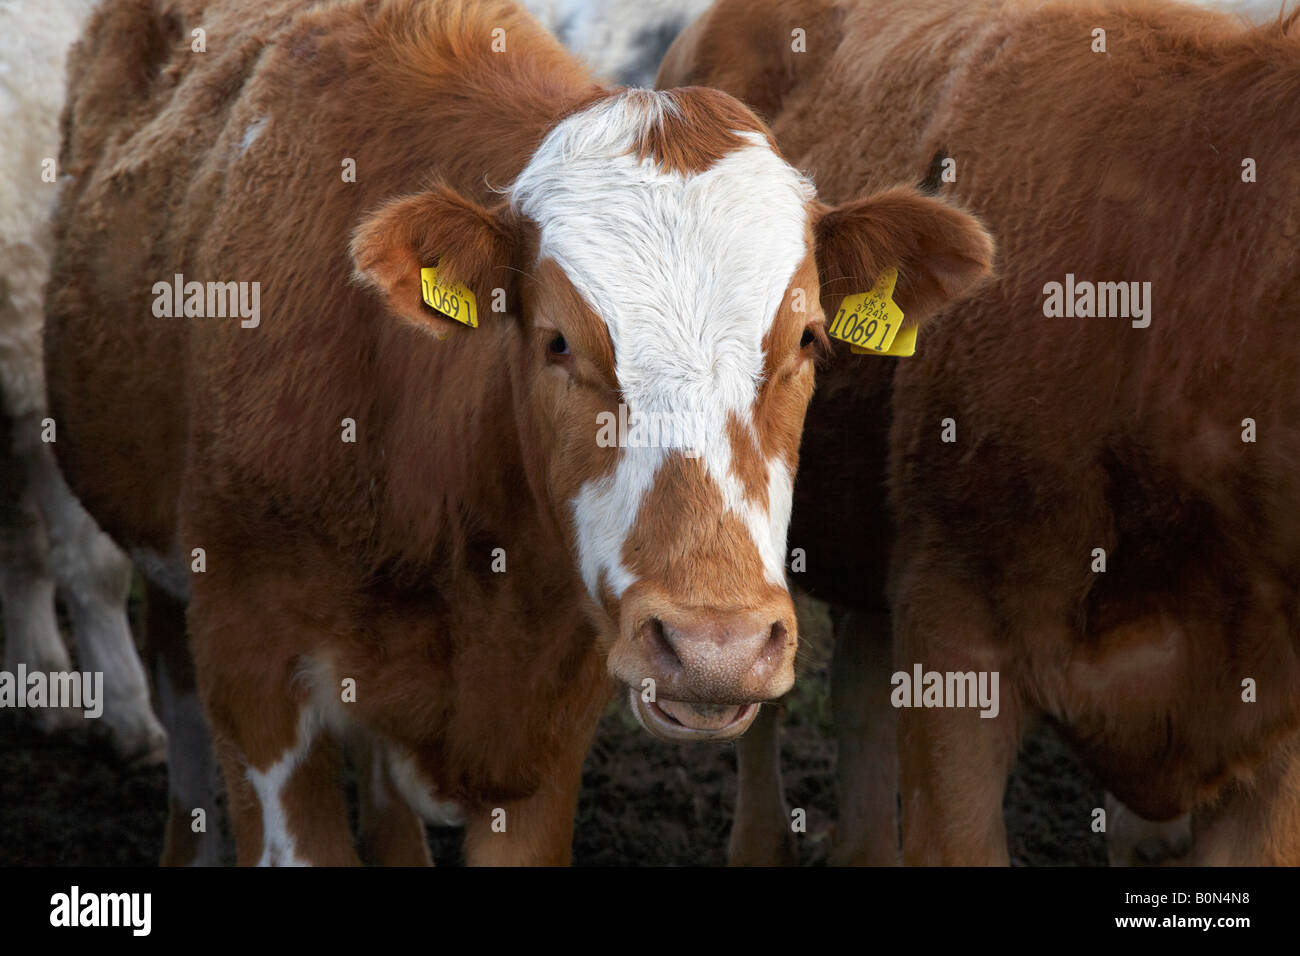 brown and white cow with ear tags indentification in a herd of cattle in northern ireland Stock Photo